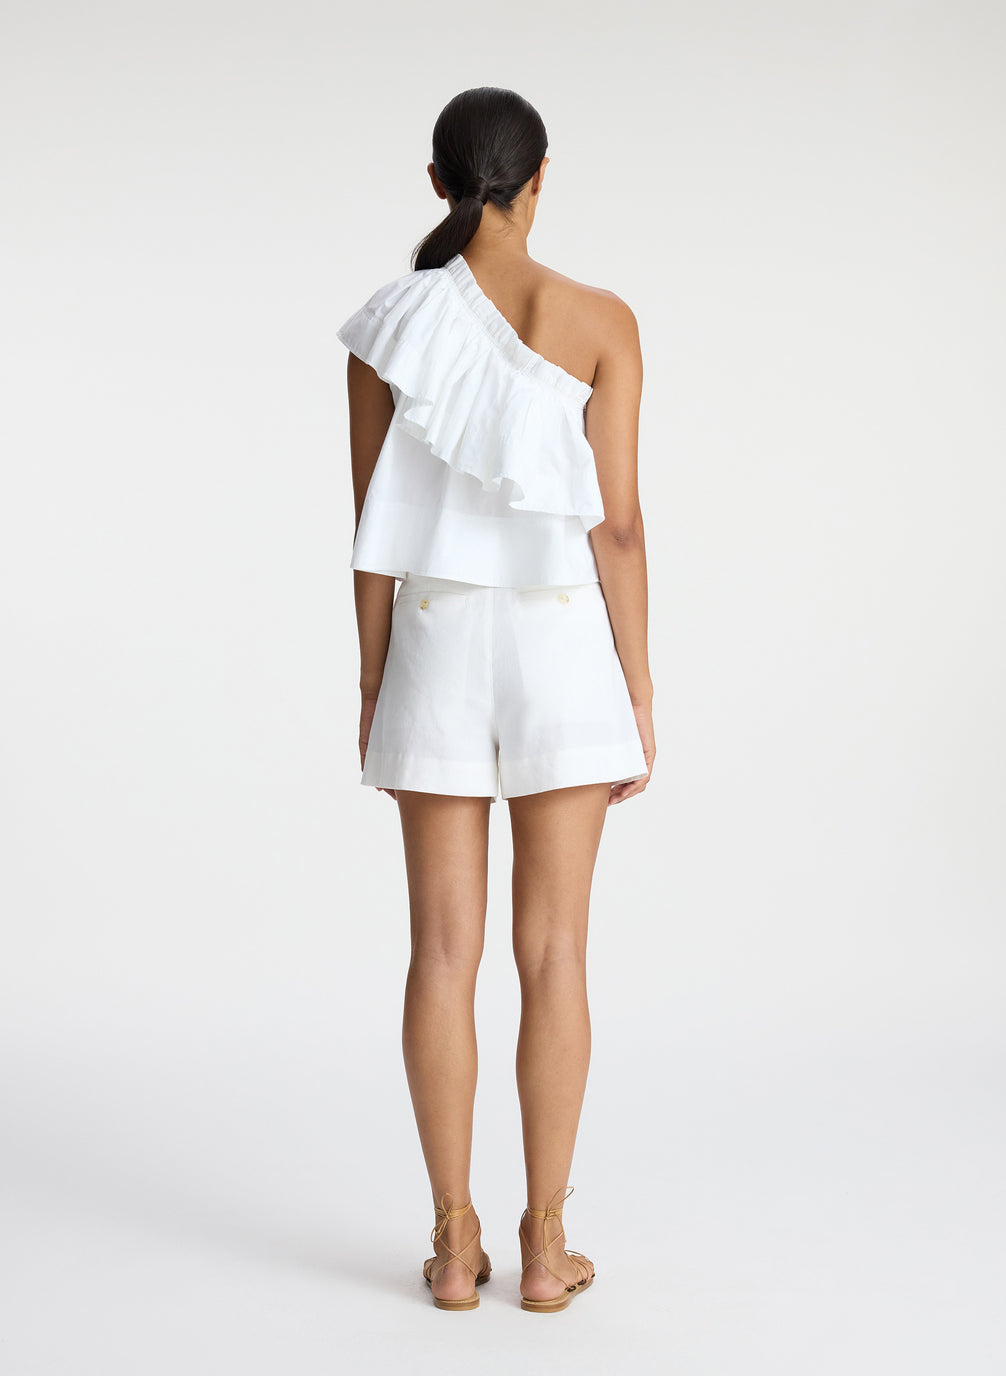 back view of woman wearing white one shoulder ruffle top and white shorts